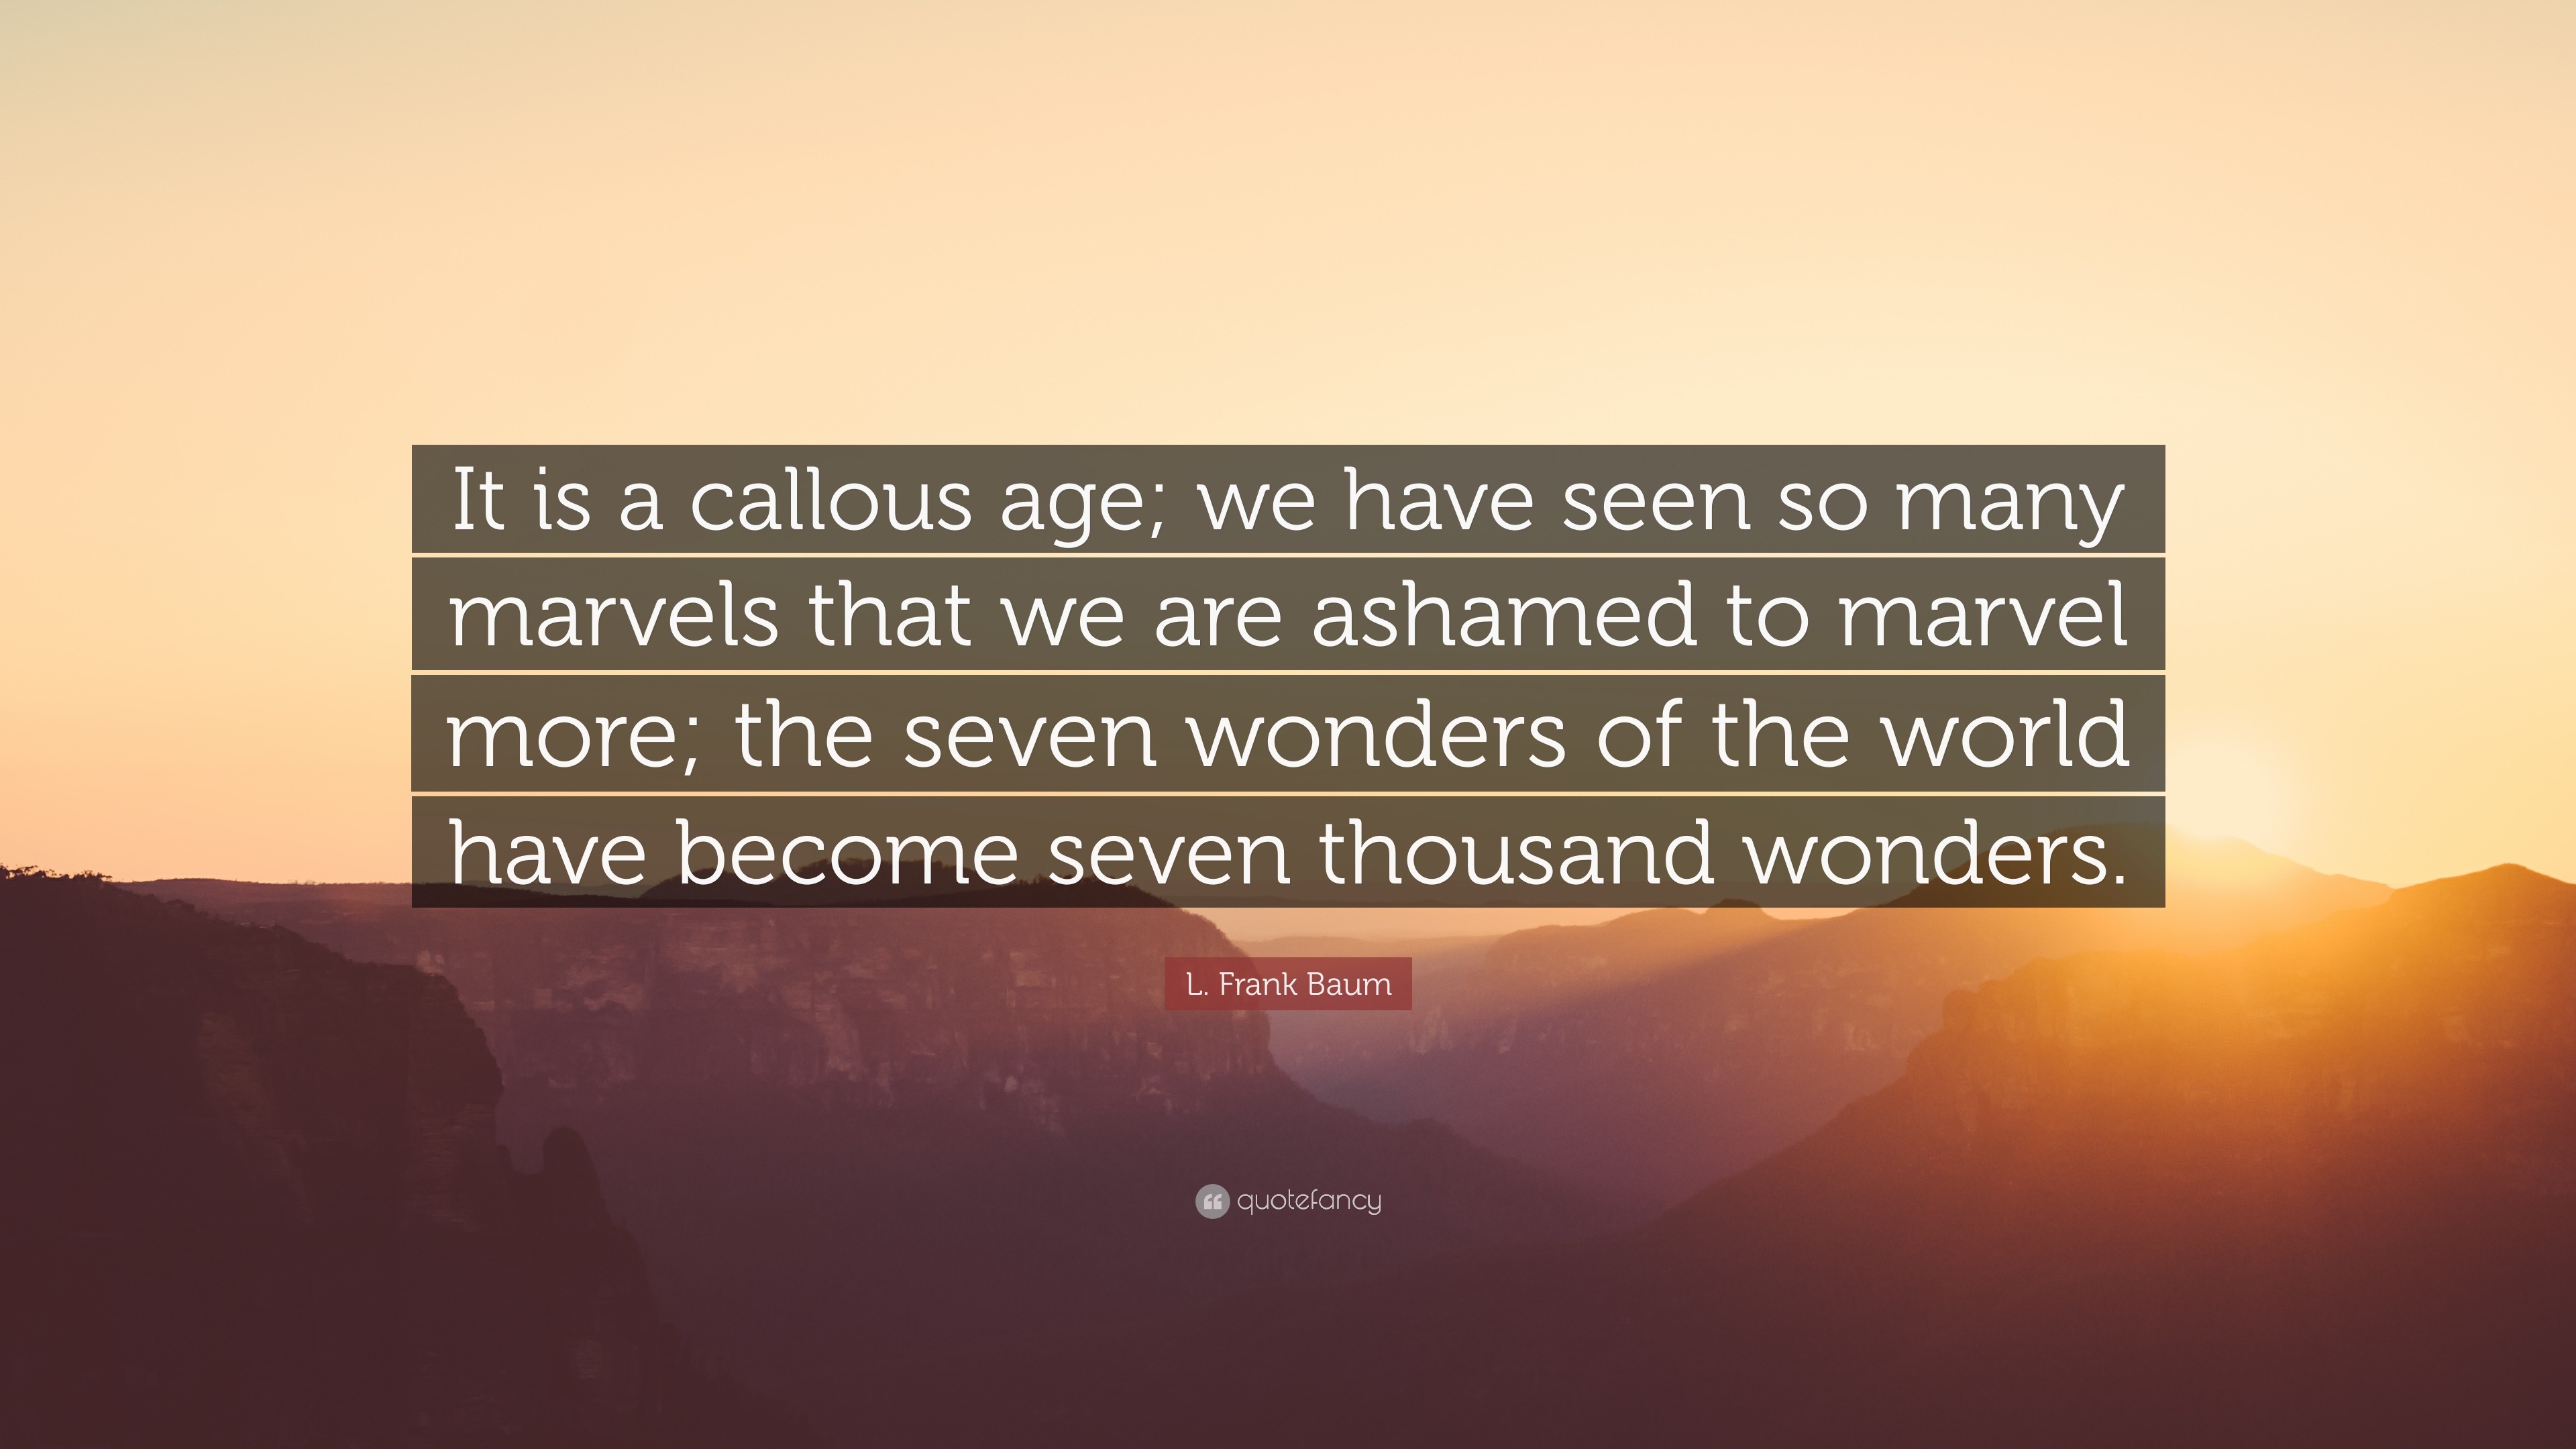 L. Frank Baum Quote: “It Is A Callous Age; We Have Seen So Many Marvels That We Are Ashamed To Marvel More; The Seven Wonders Of The World Hav...”